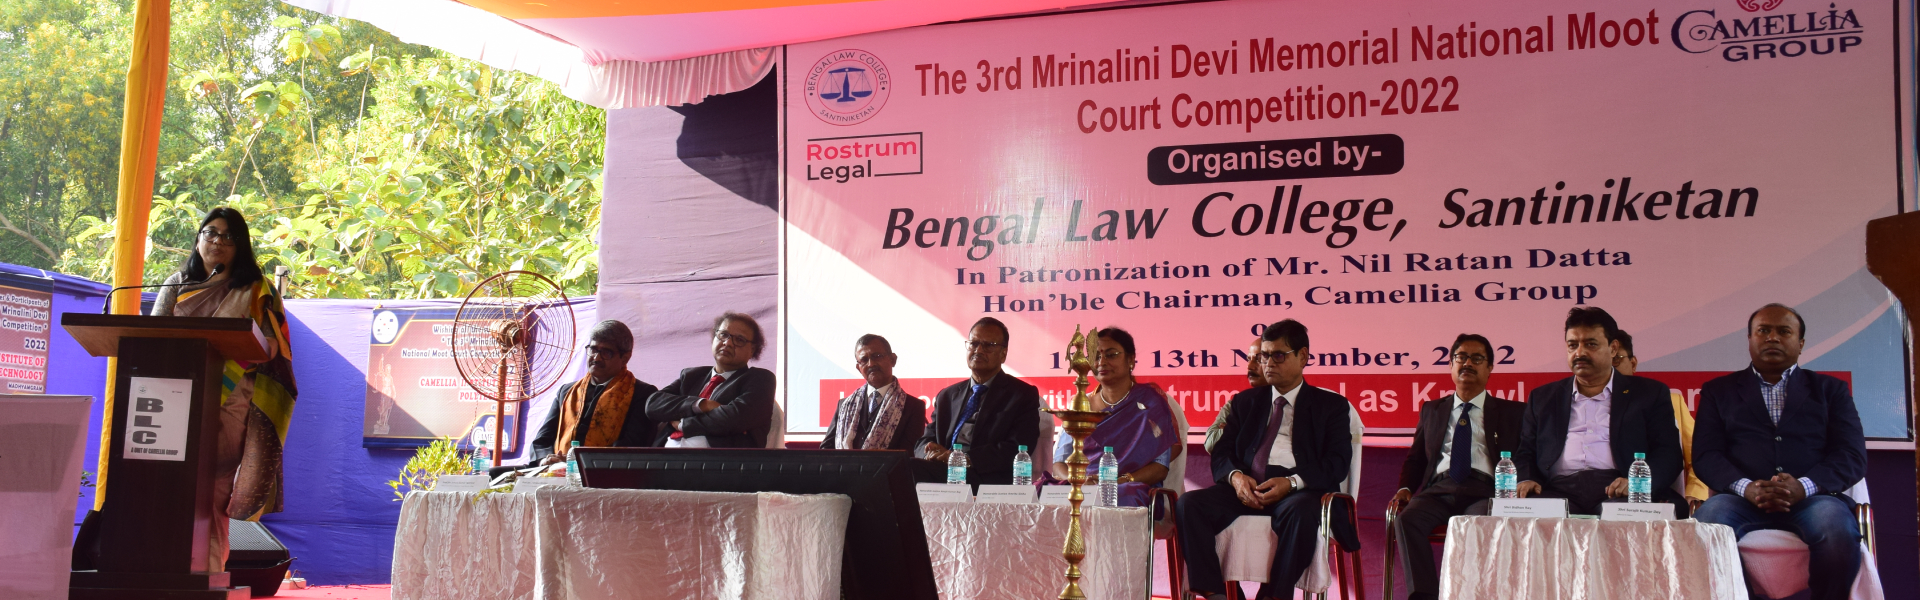 bengal-law-college-banner